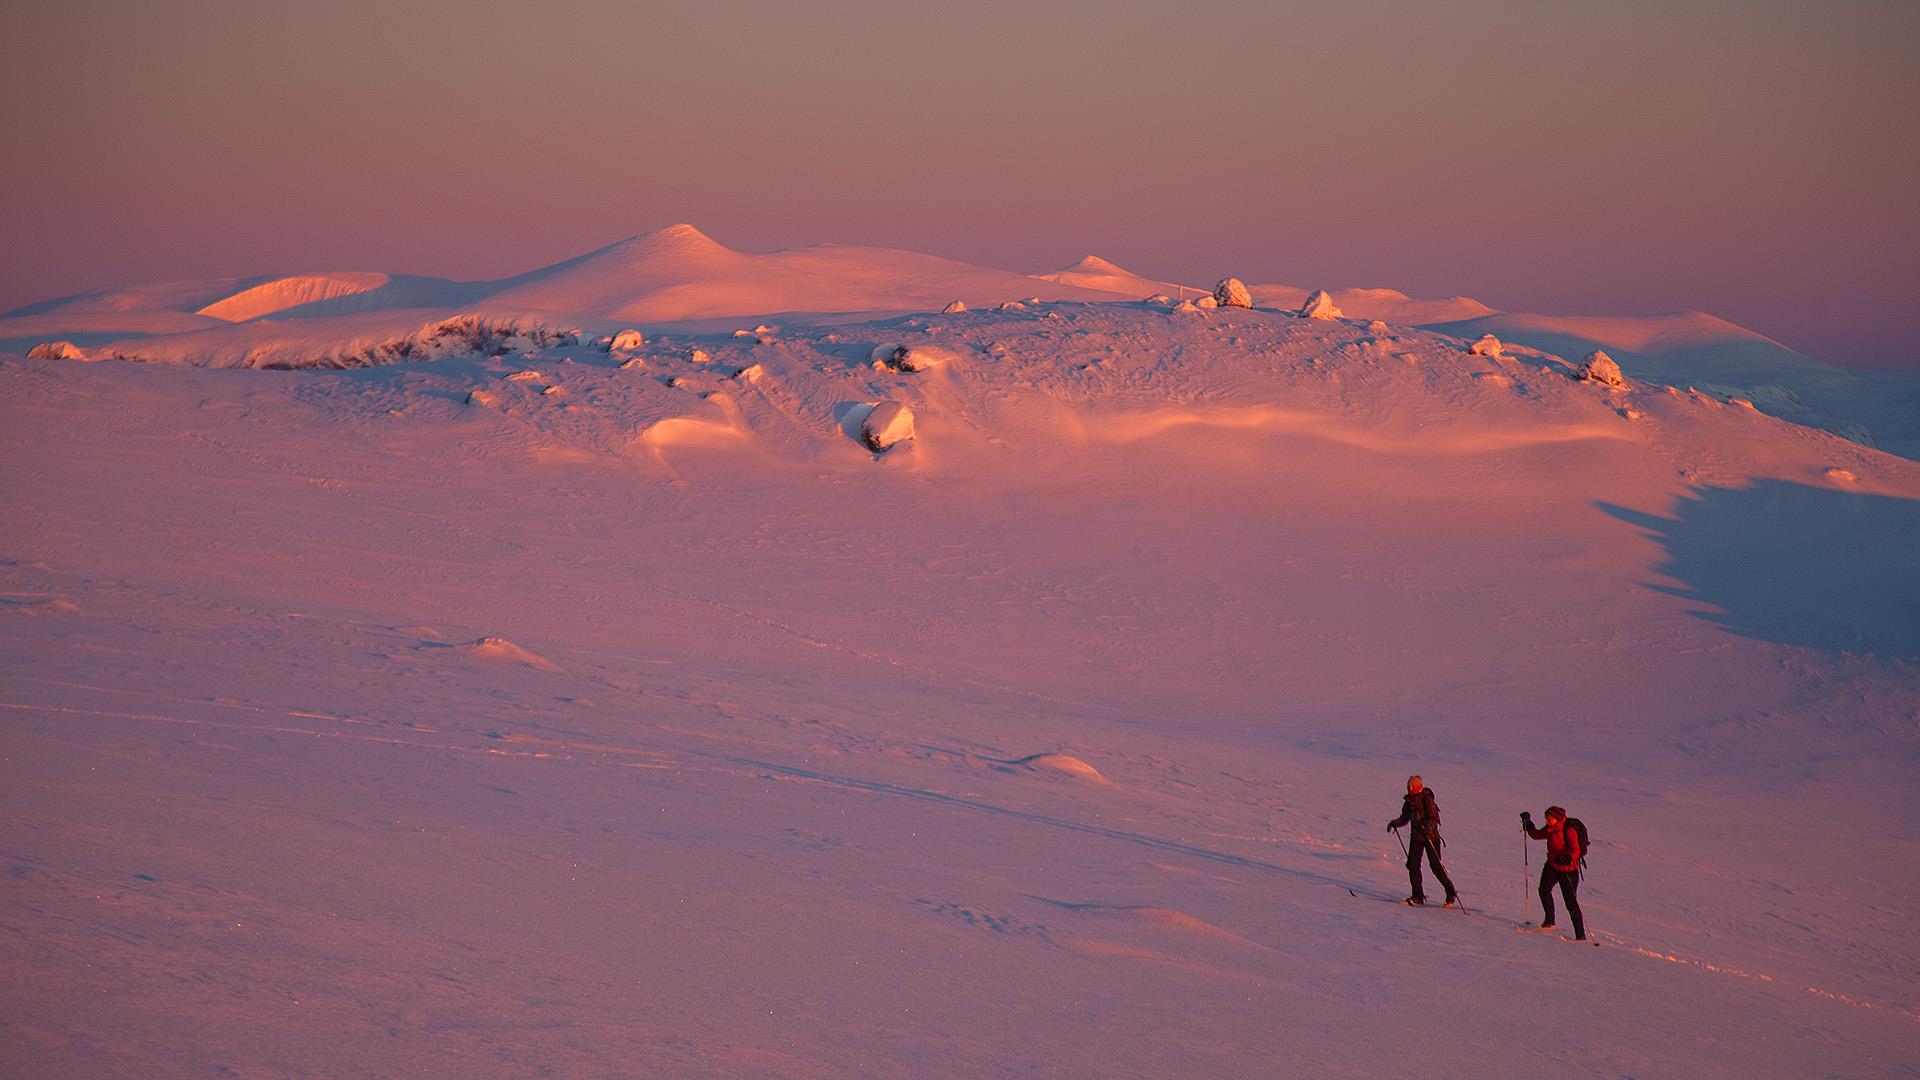 Two back-country skiers in the winter-mountains on their way uphill with peaks rising in the background. The sunrise paints the whole scene - snow-covered ground and sky - in reddish-pink coloures.